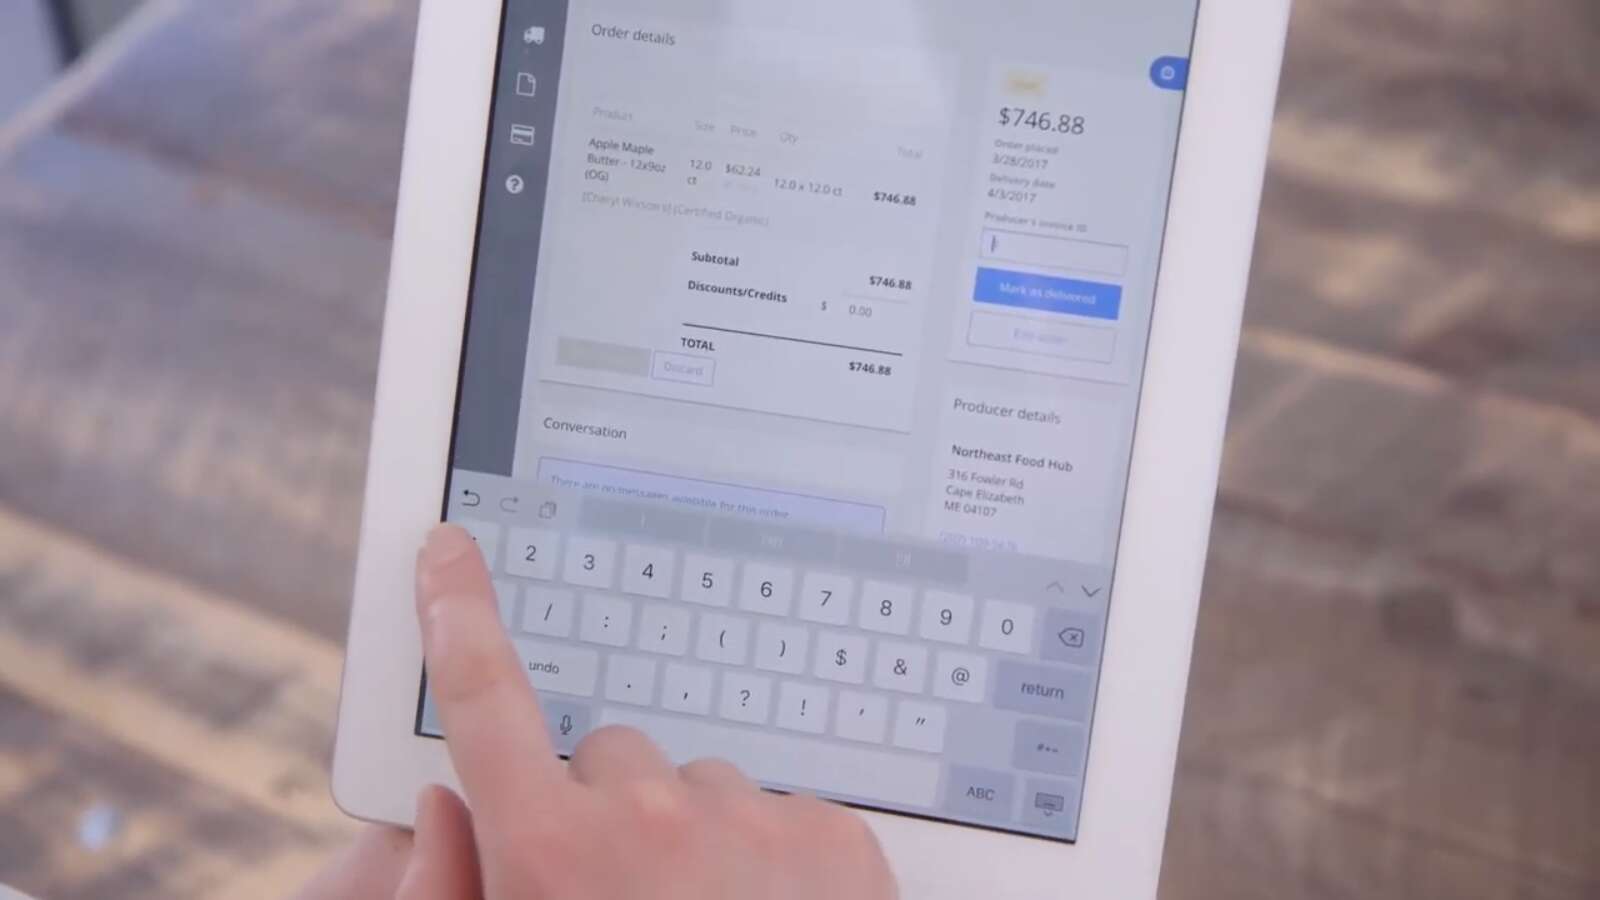 A finger pointing to a key on a digital tablet, with the screen on the tablet showing the price of apple butter and an order for it